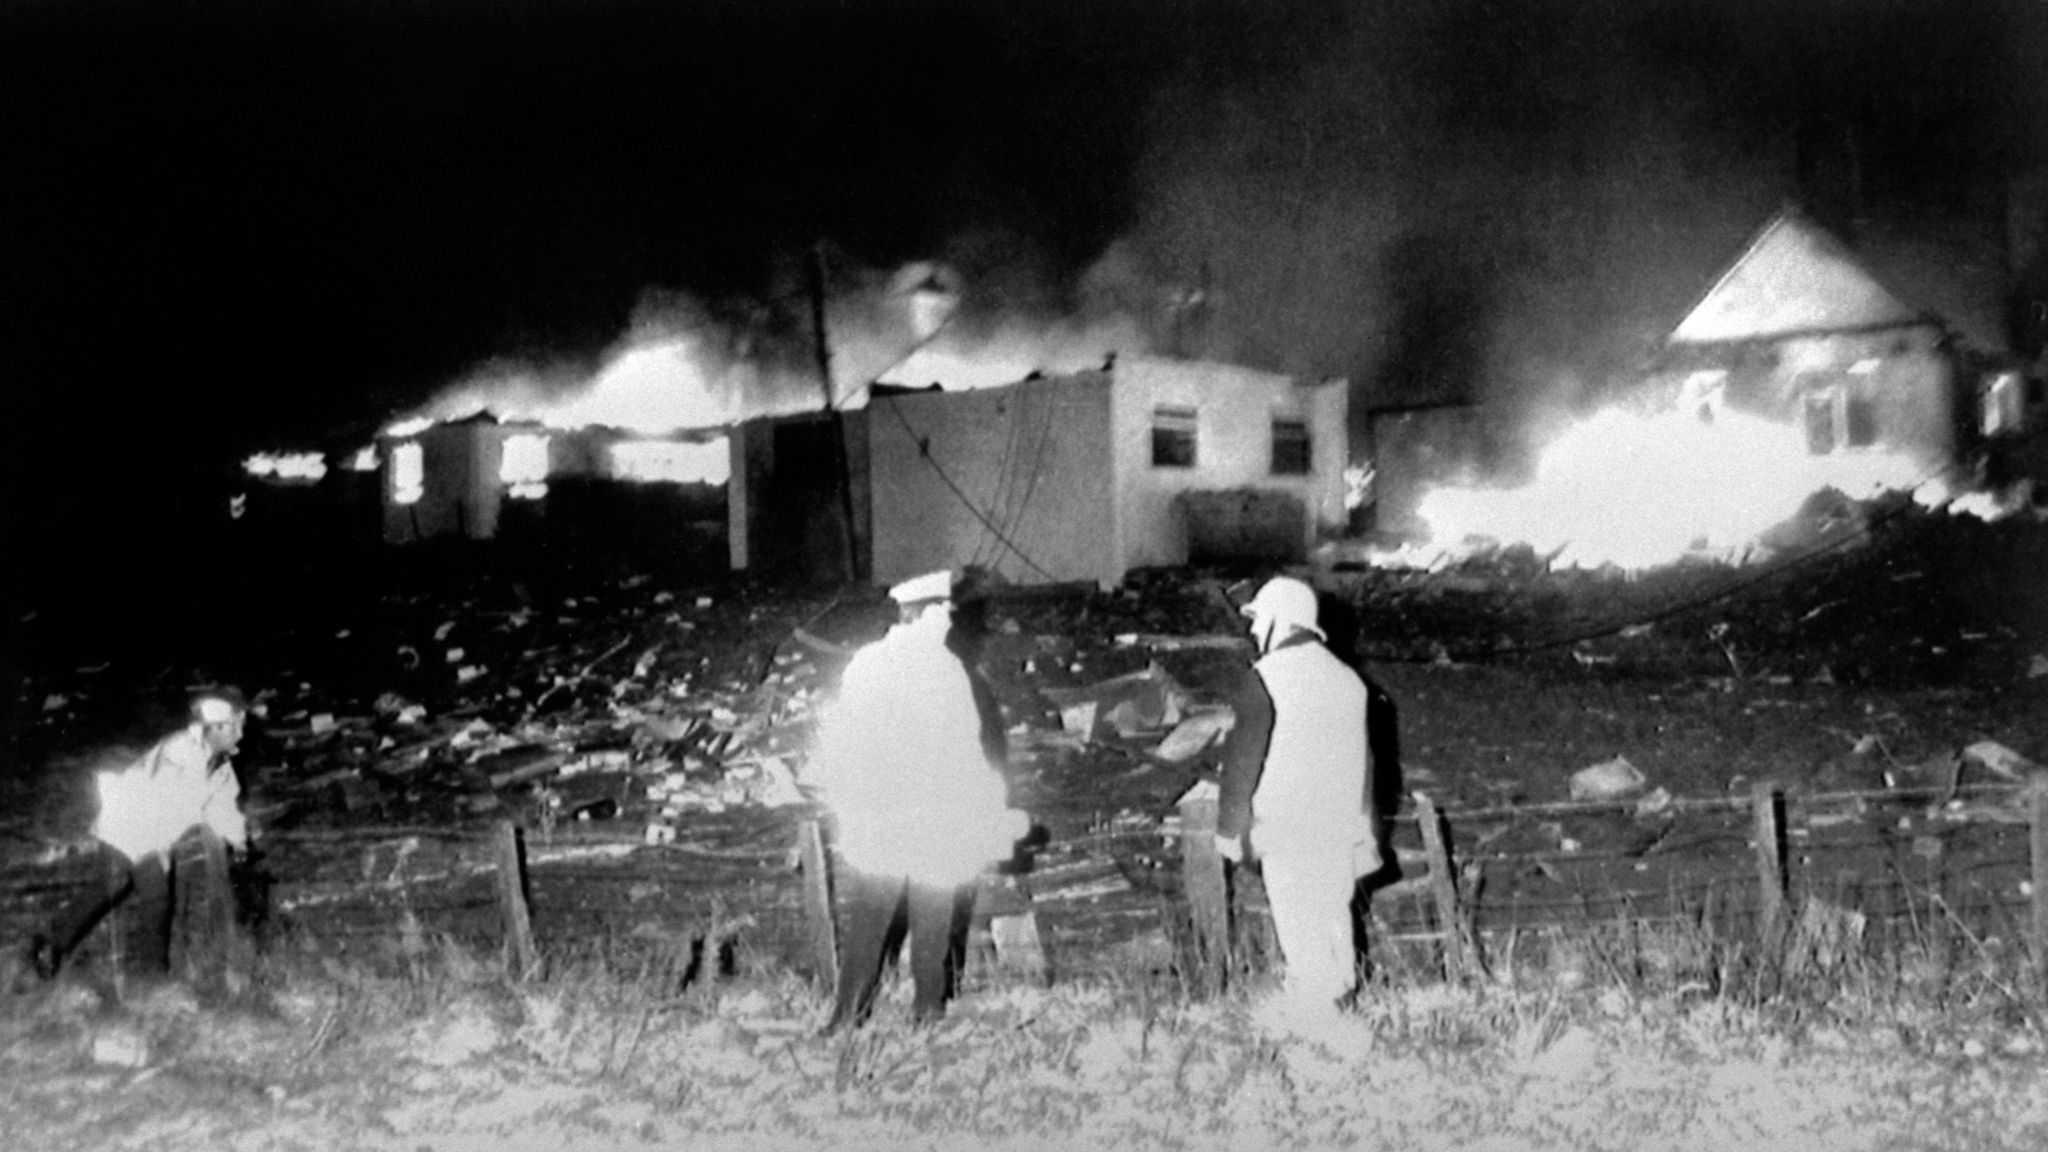 Houses on fire following the blowing up of Pan Am flight 103 over Lockerbie, December 21st 1988